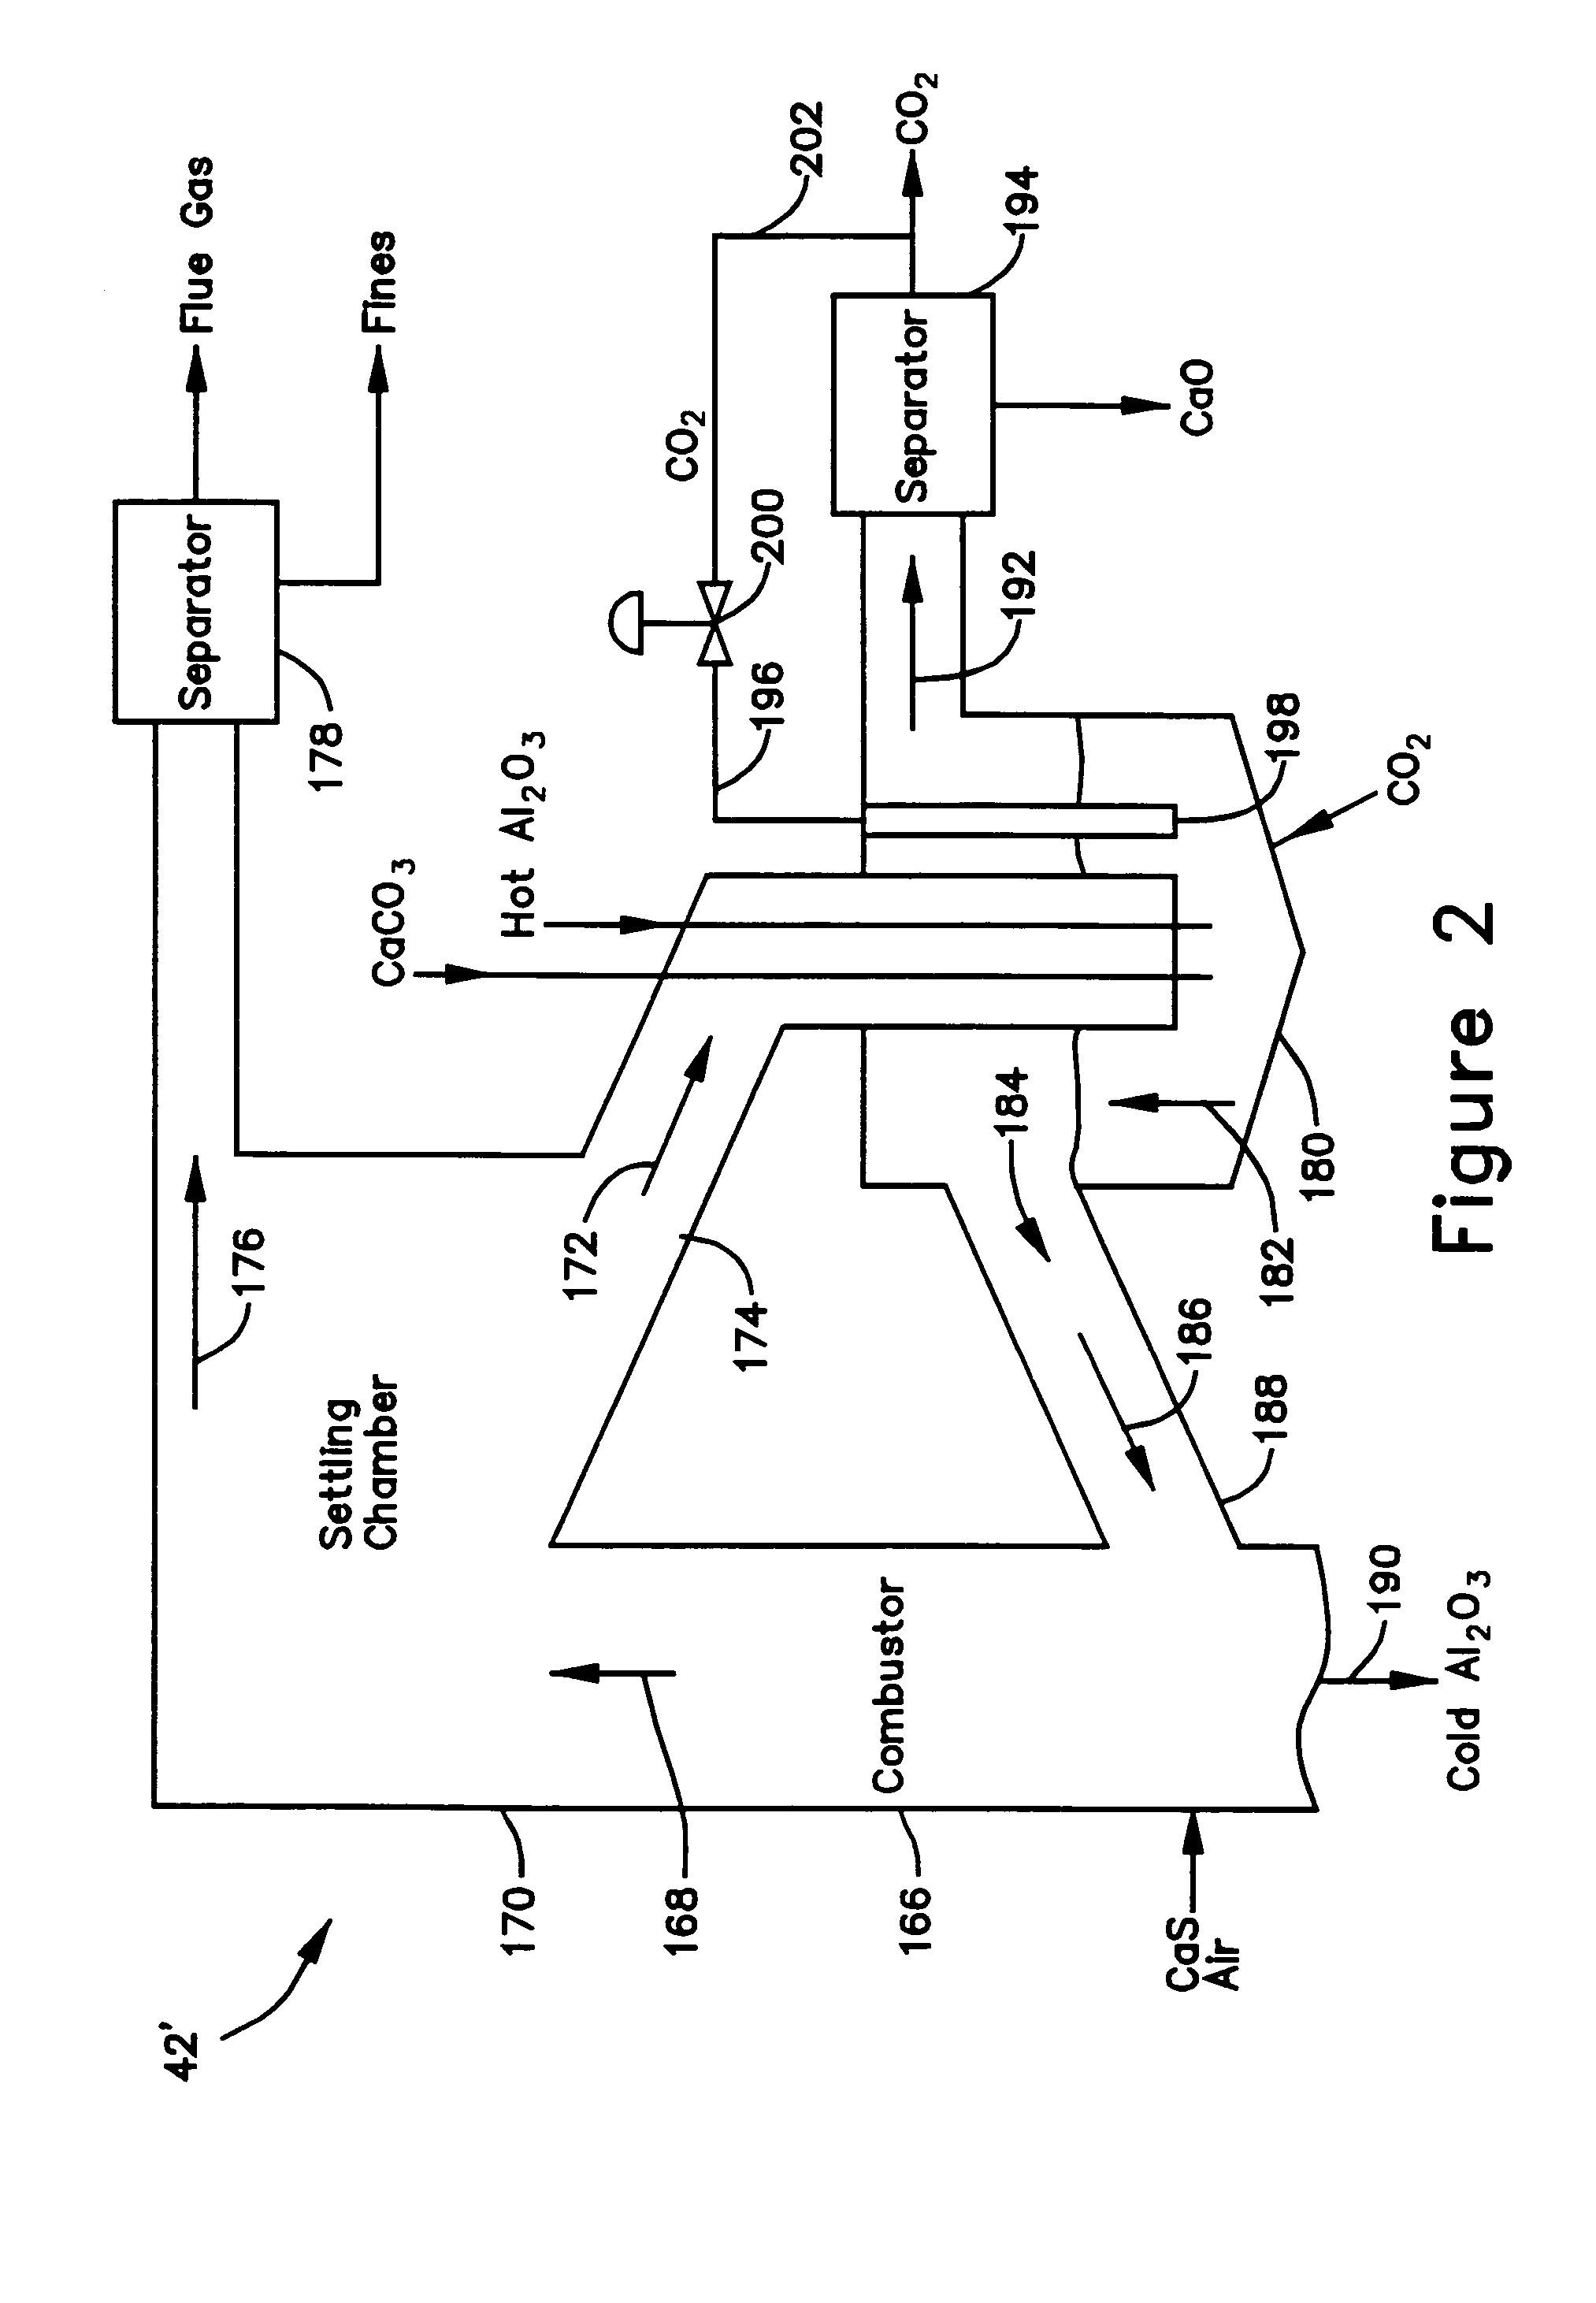 Hot solids gasifier with CO2 removal and hydrogen production